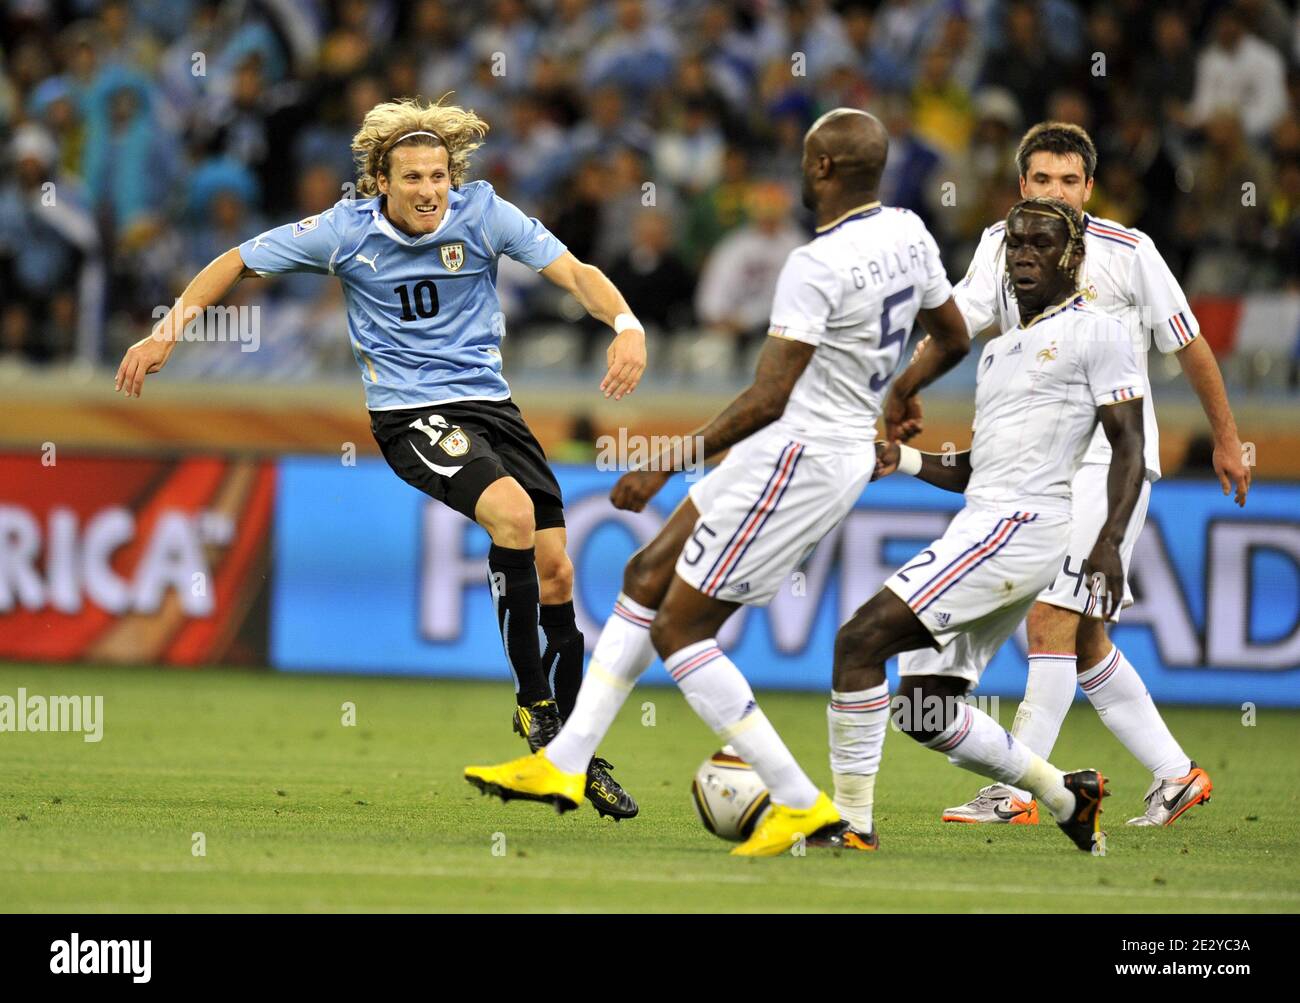 Uruguay's Diego Forlan battles for the ball with France's defenders Bacary Sagna and William Gallas during the FIFA World Cup soccer match, France (France national football team) vs Uruguay in Capetown, South Africa, on June 11, 2010. The match ended in a 0-0 draw. Photo by Christophe Guibbaud/Cameleon/ABACAPRESS.COM Stock Photo